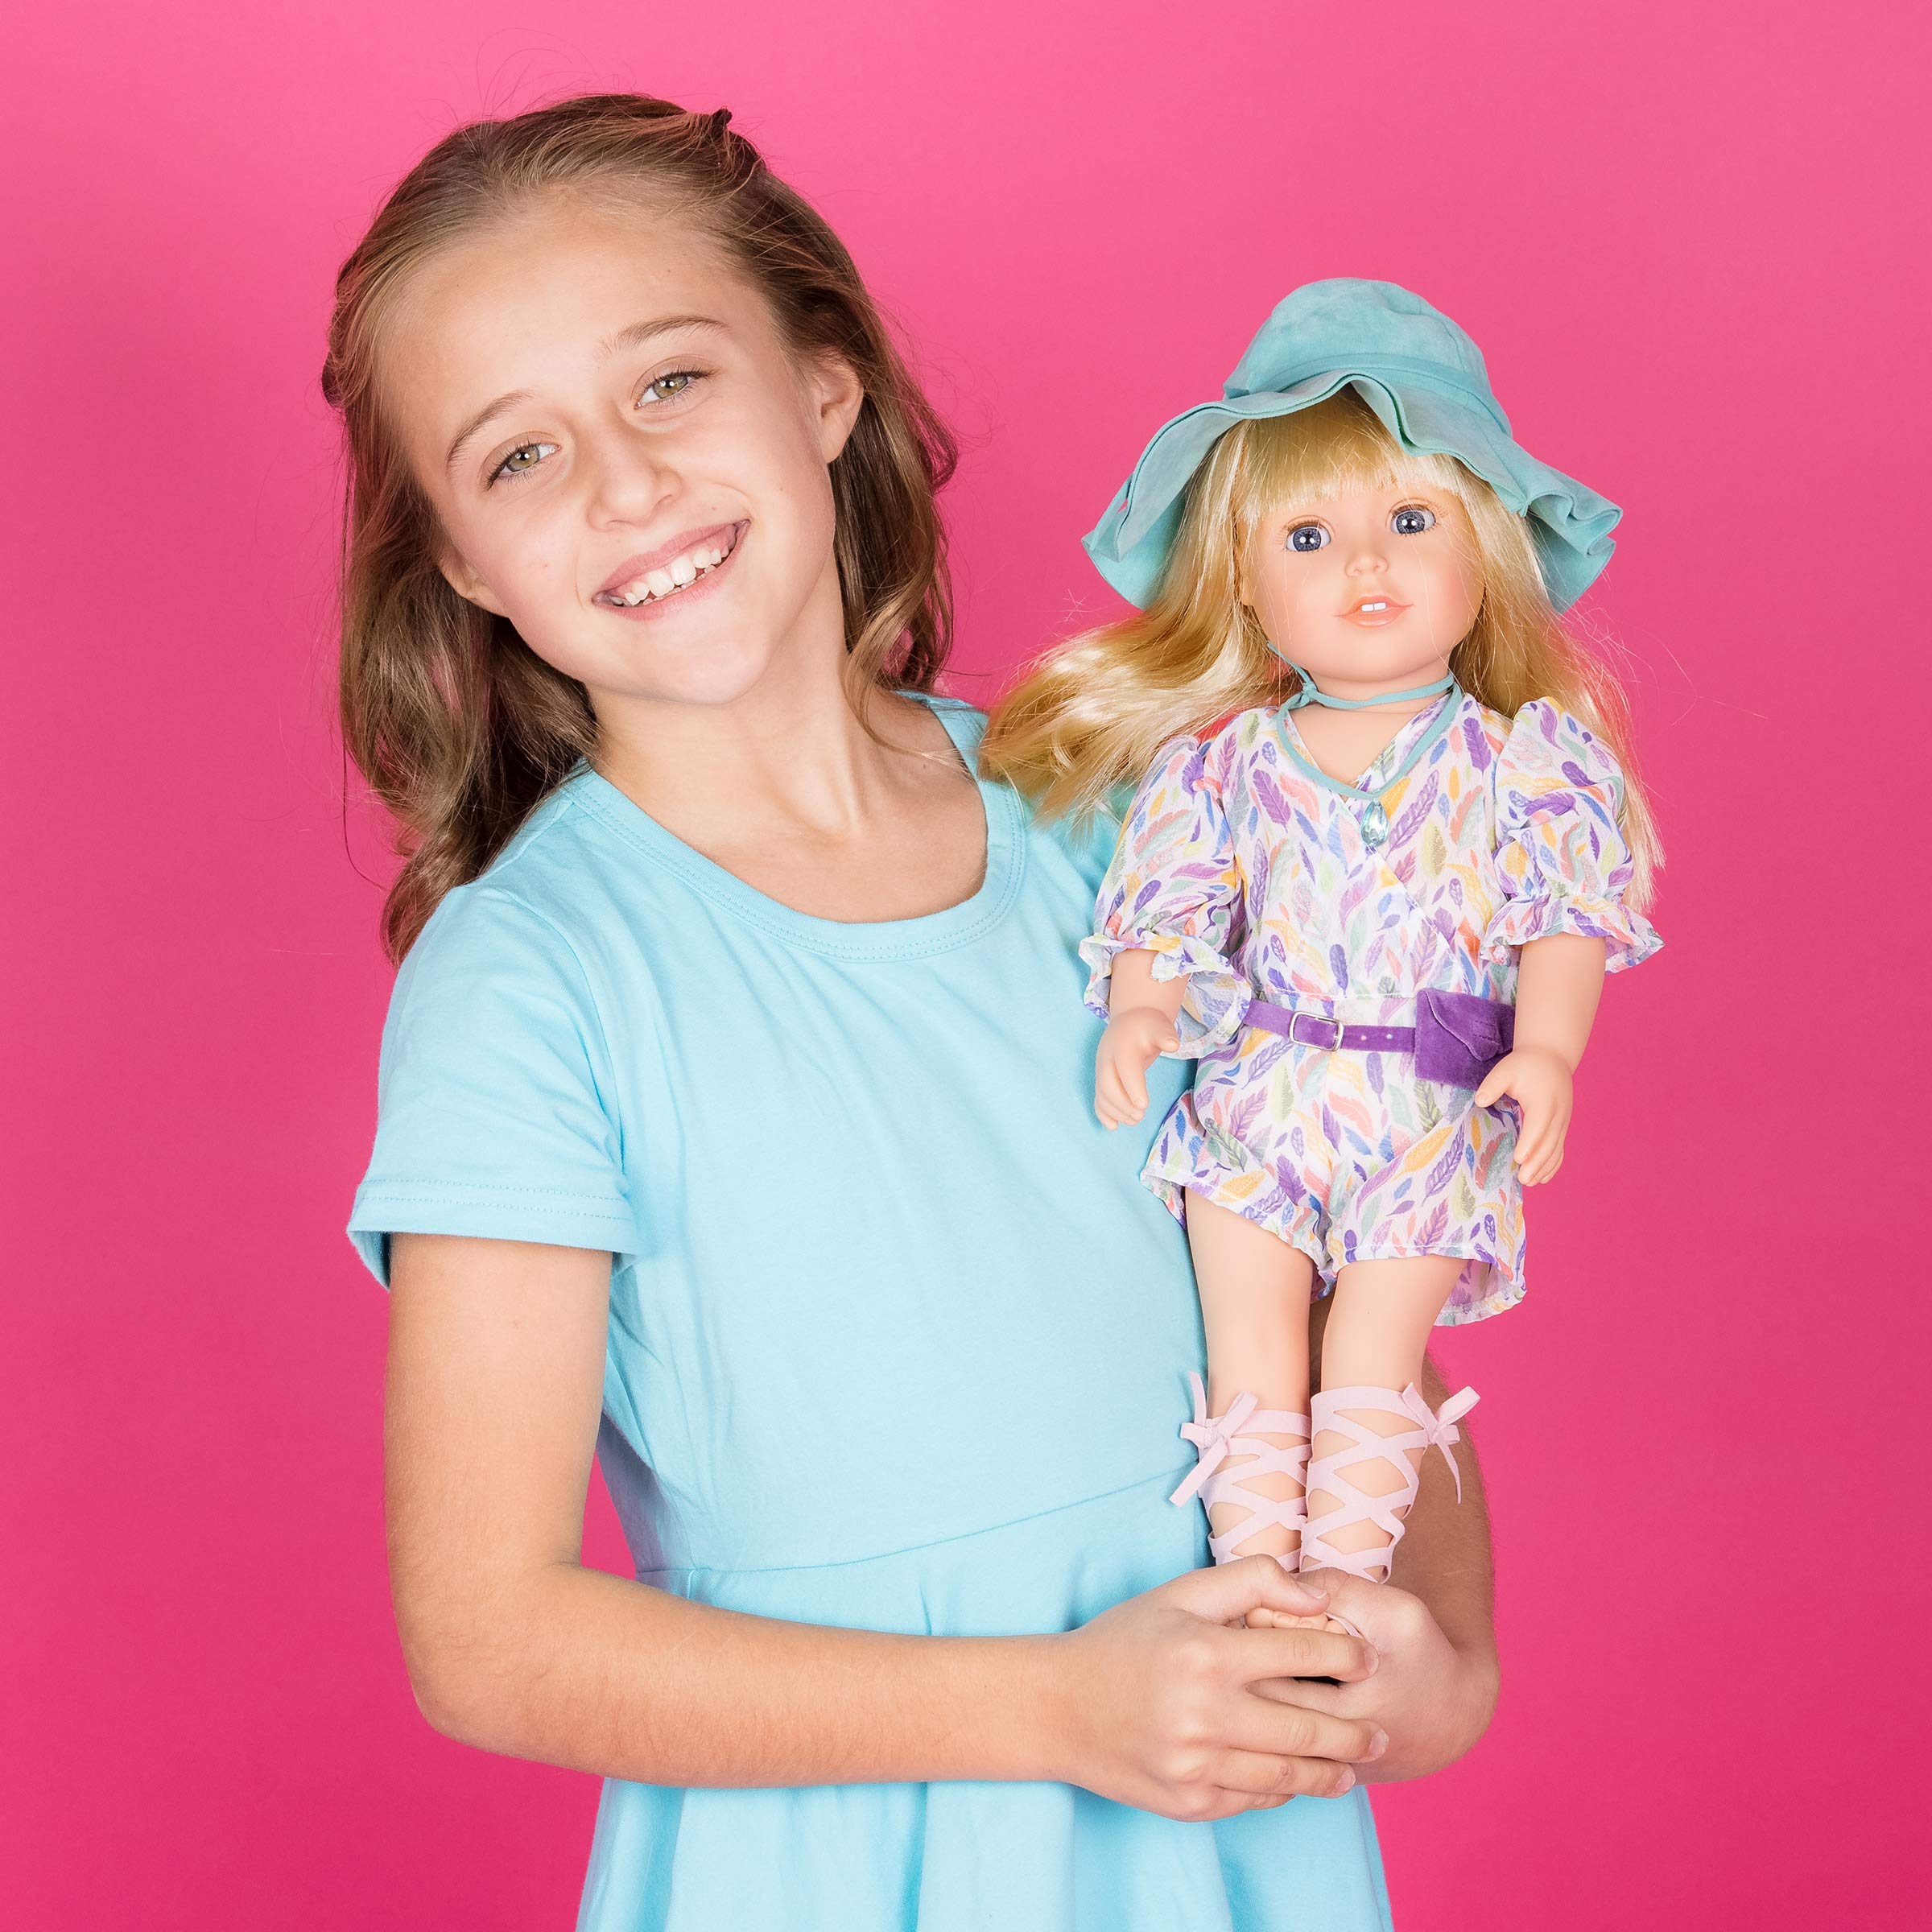 Adora 18-inch Doll Amazing Girls Claire (Amazon Exclusive)